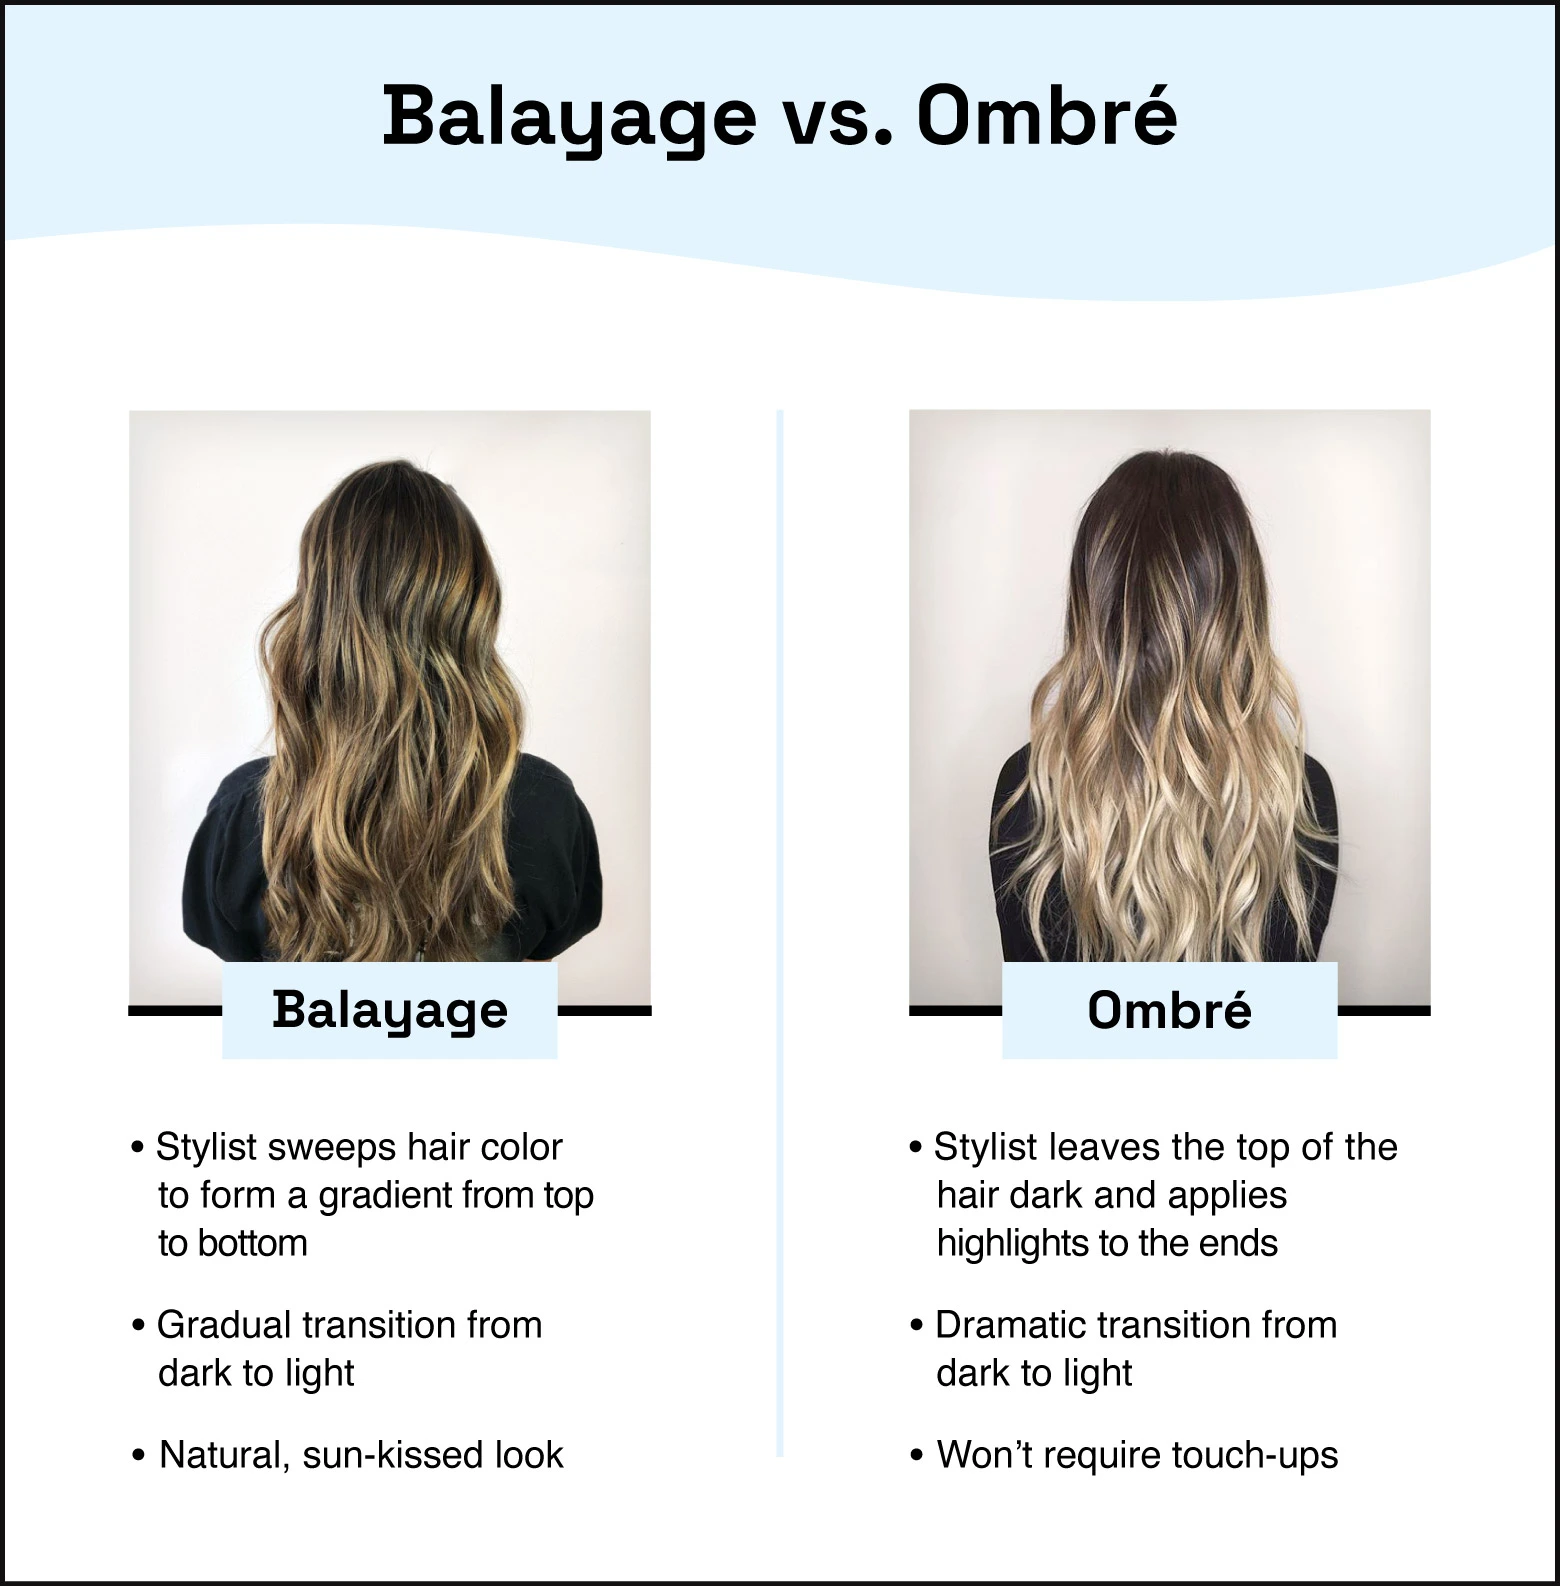 side-by-side comparison of balayage and ombre photos with text under each photo summarizing main differences